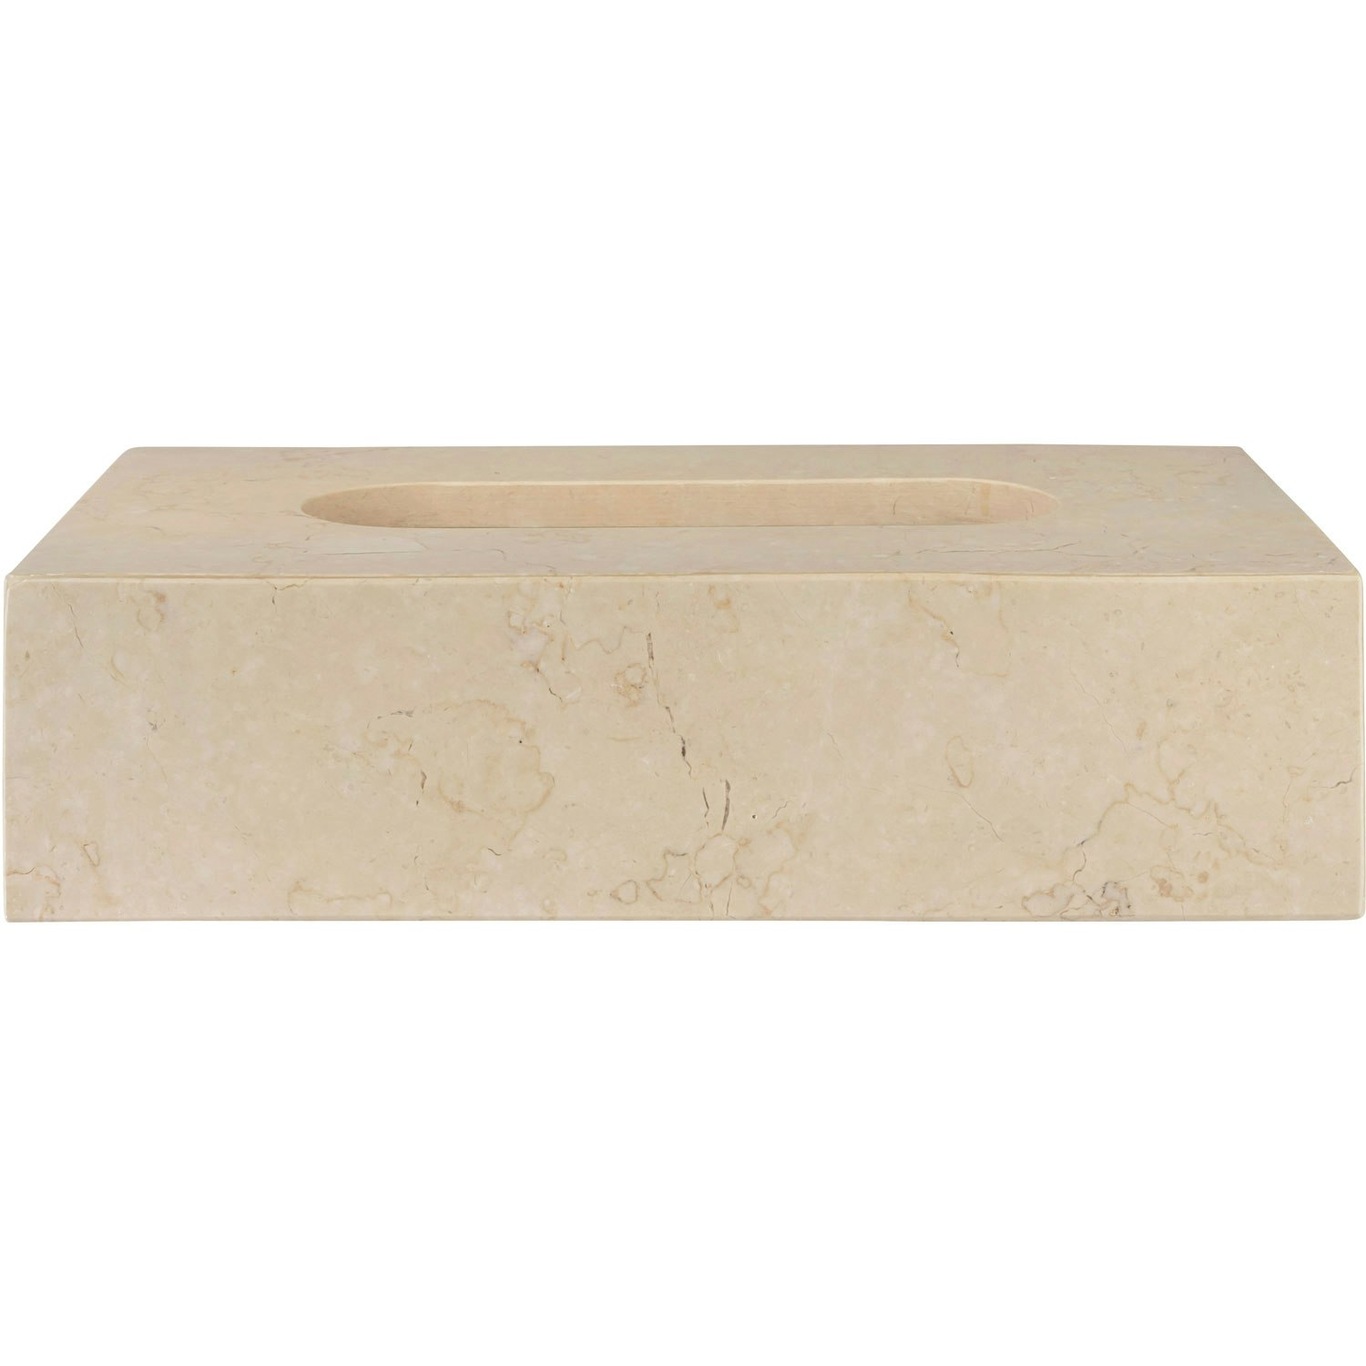 MARBLE Storage Box For Tissues, Sand